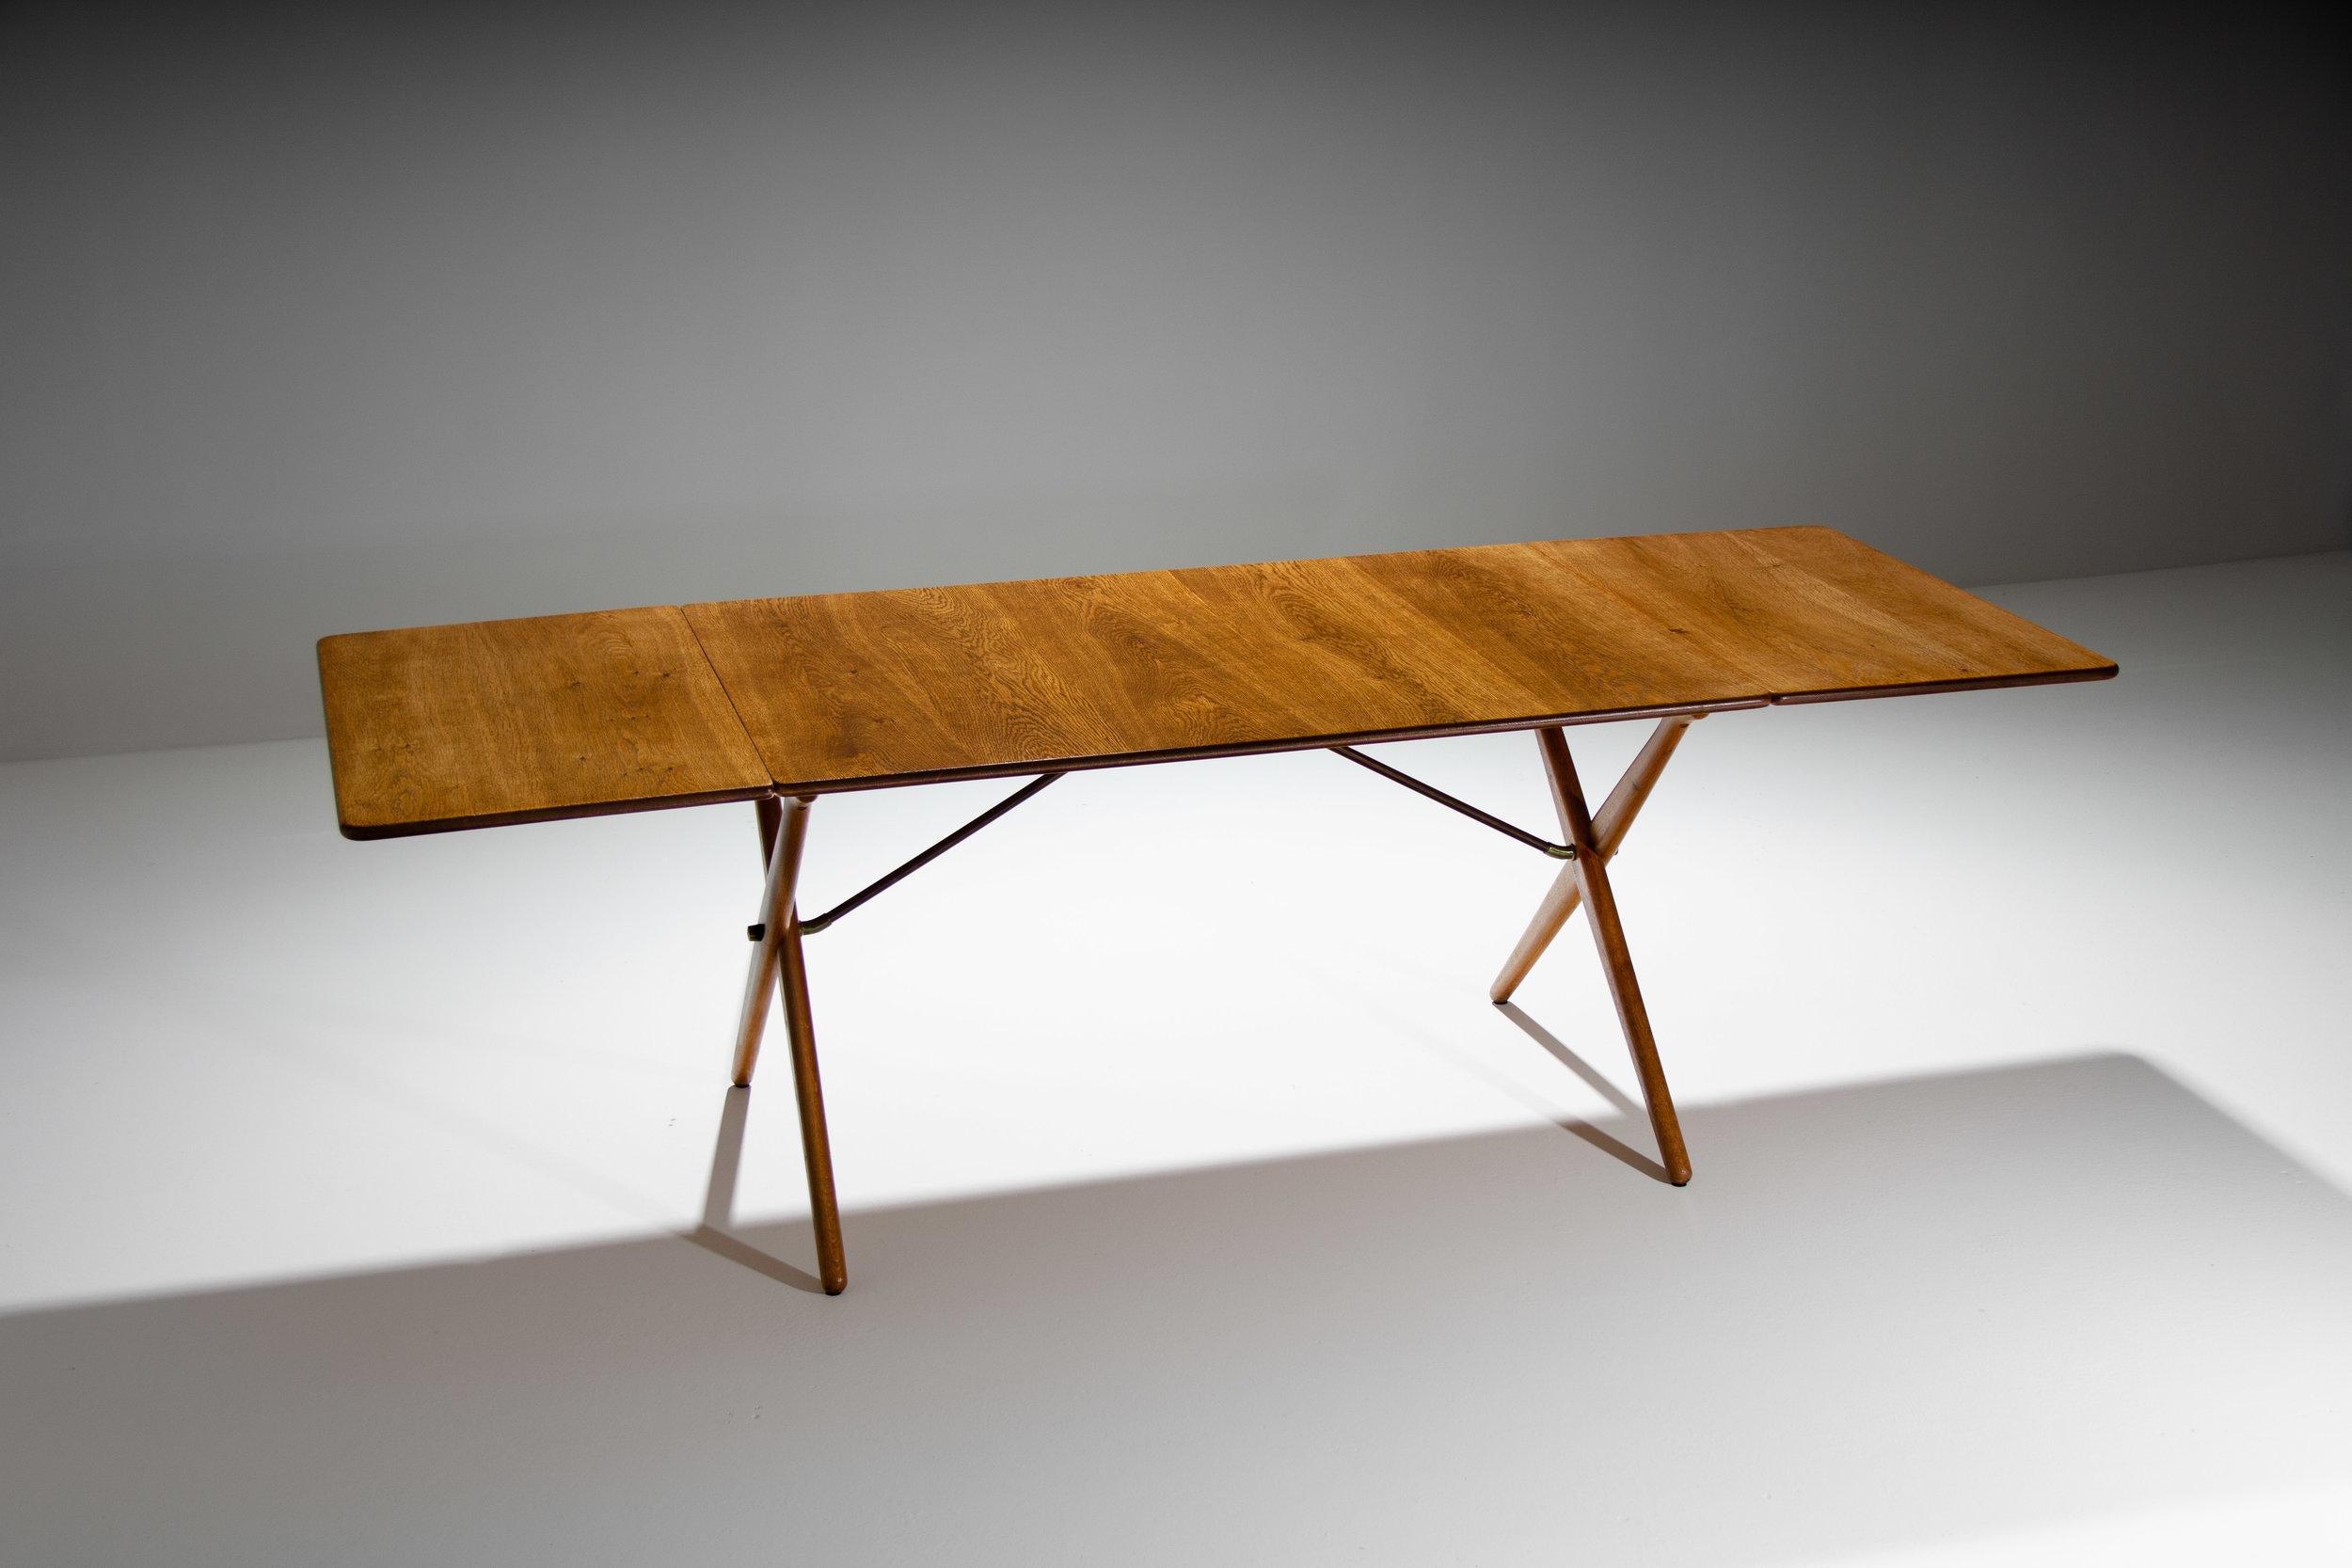 Drop-leaf dining table, model AT-309, designed by Hans Wegner in the early 1950s and manufactured by Andreas Tuck.

Hans J. Wegner became world-renowned for his chairs, but he also designed a broad range of tables, where he was just as thorough